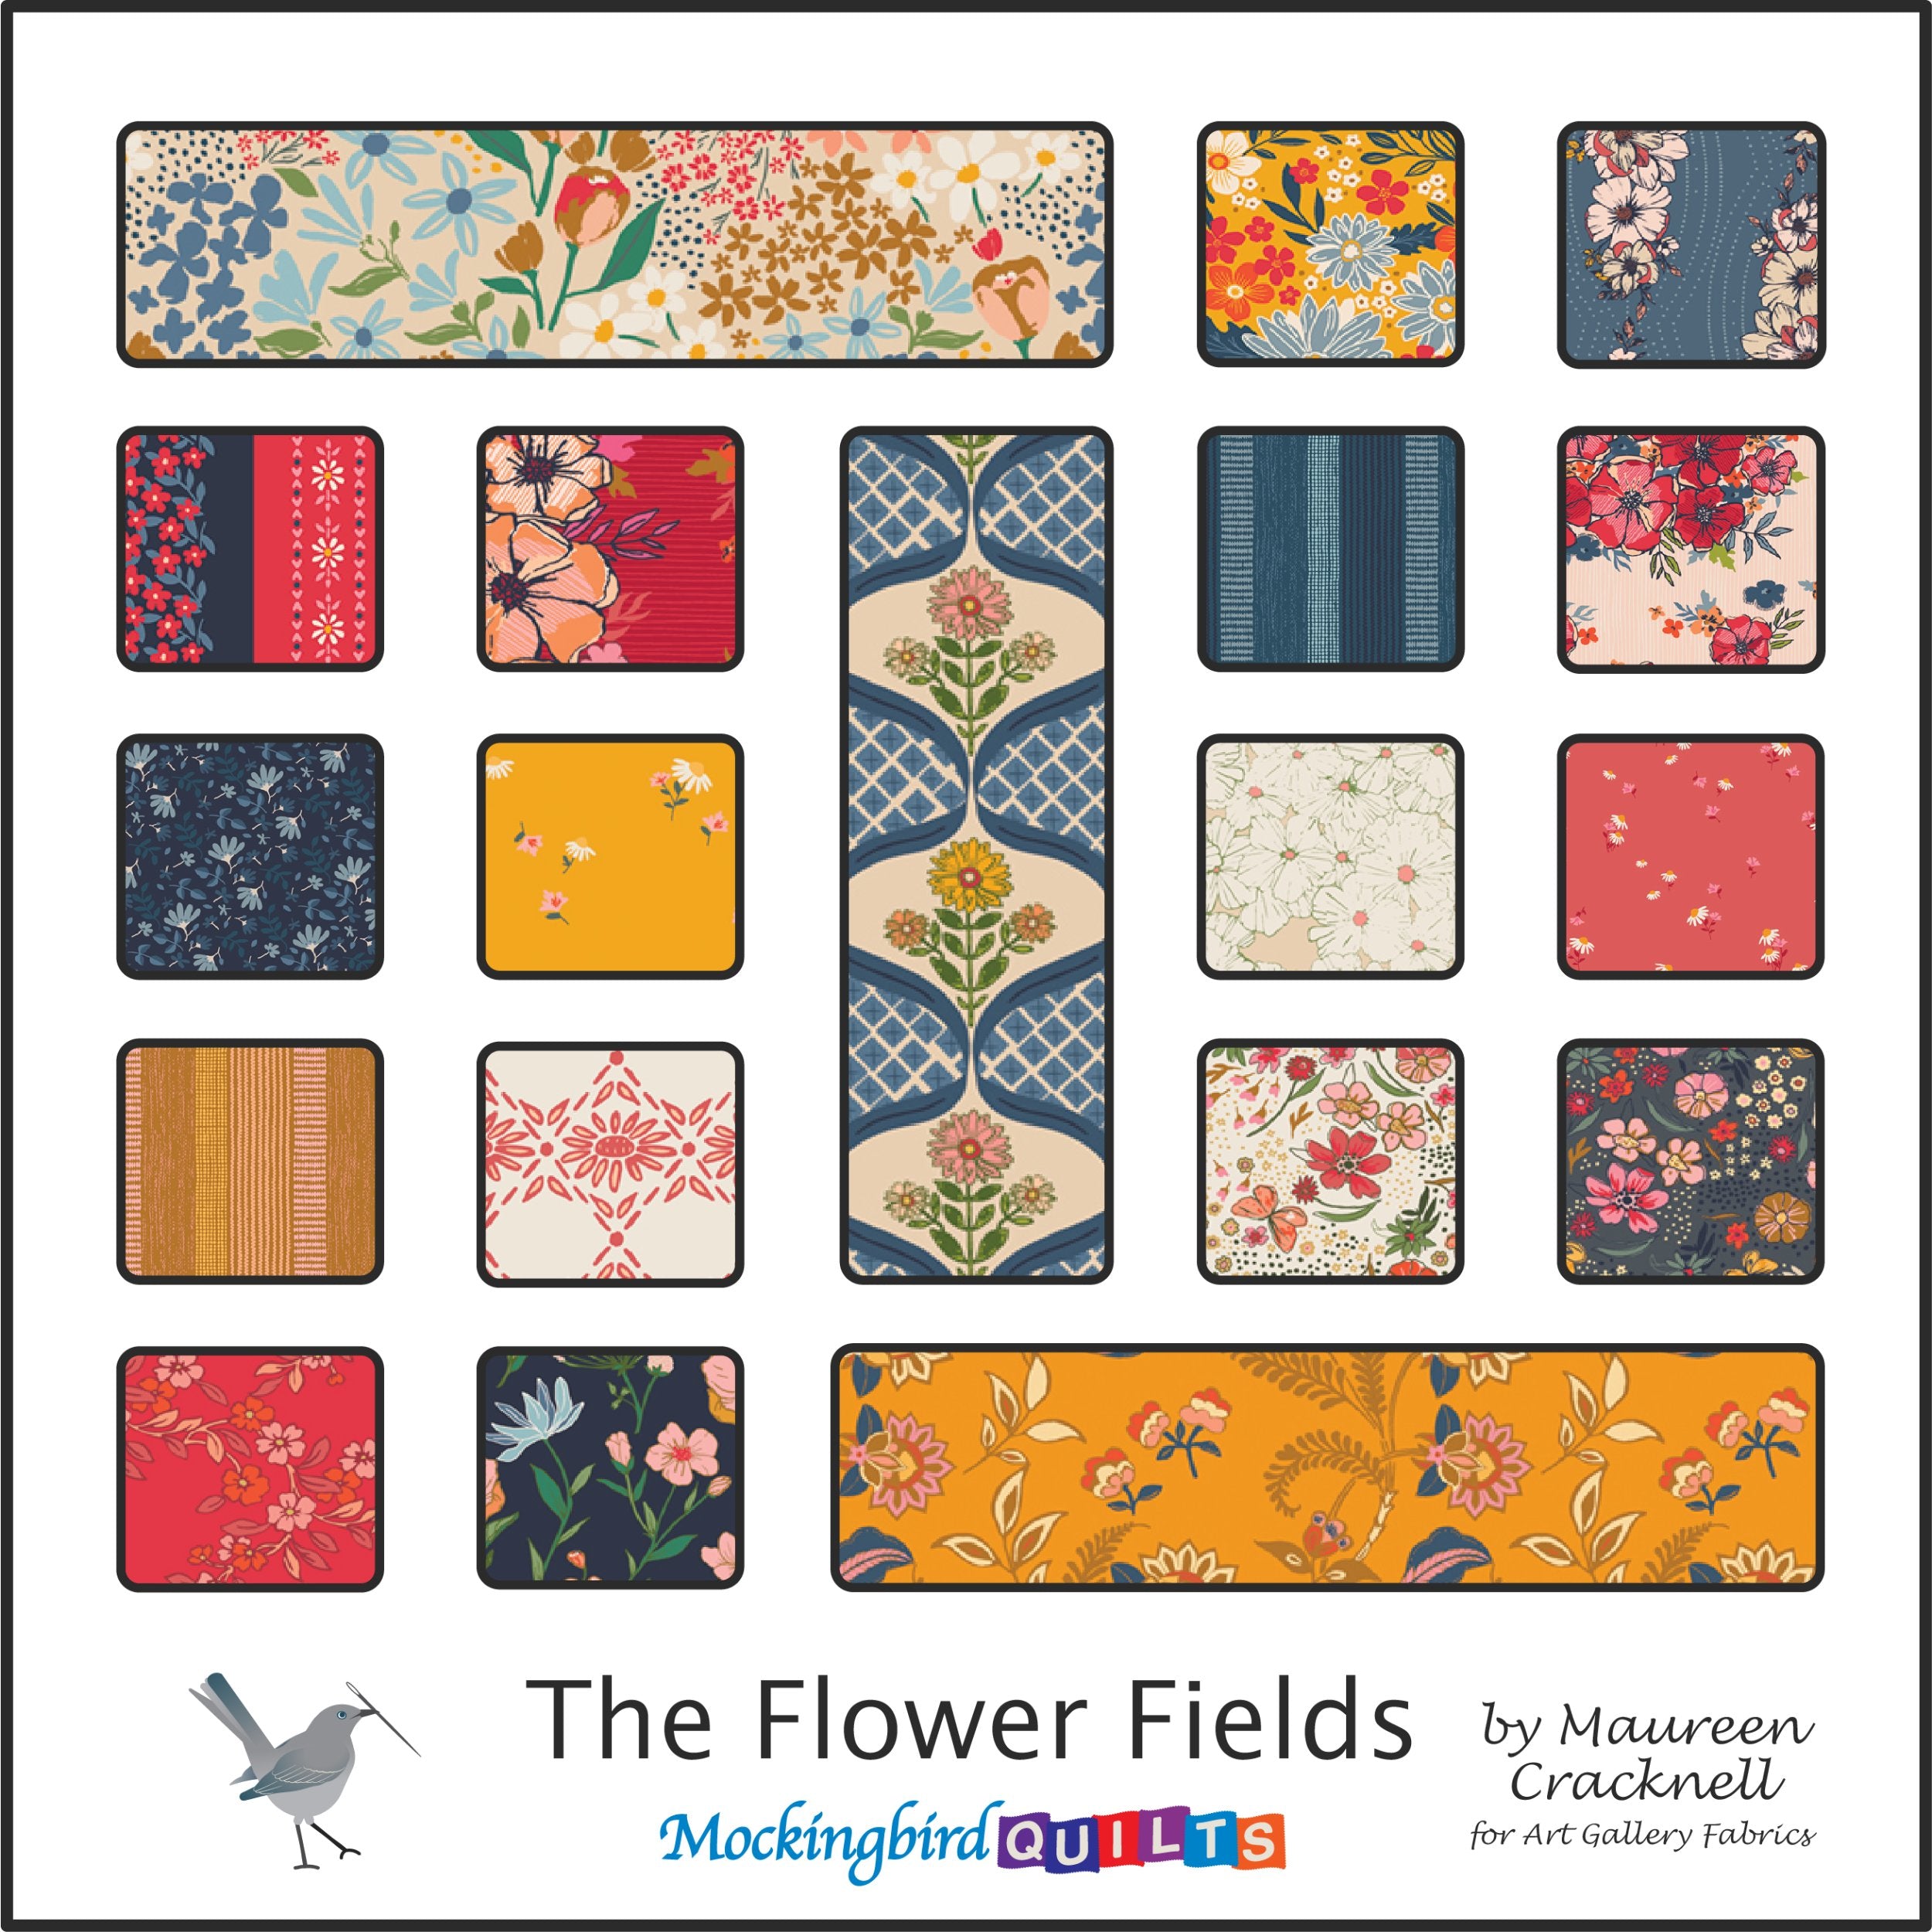 The Flower Fields by Maureen Cracknell - Coming Soon!